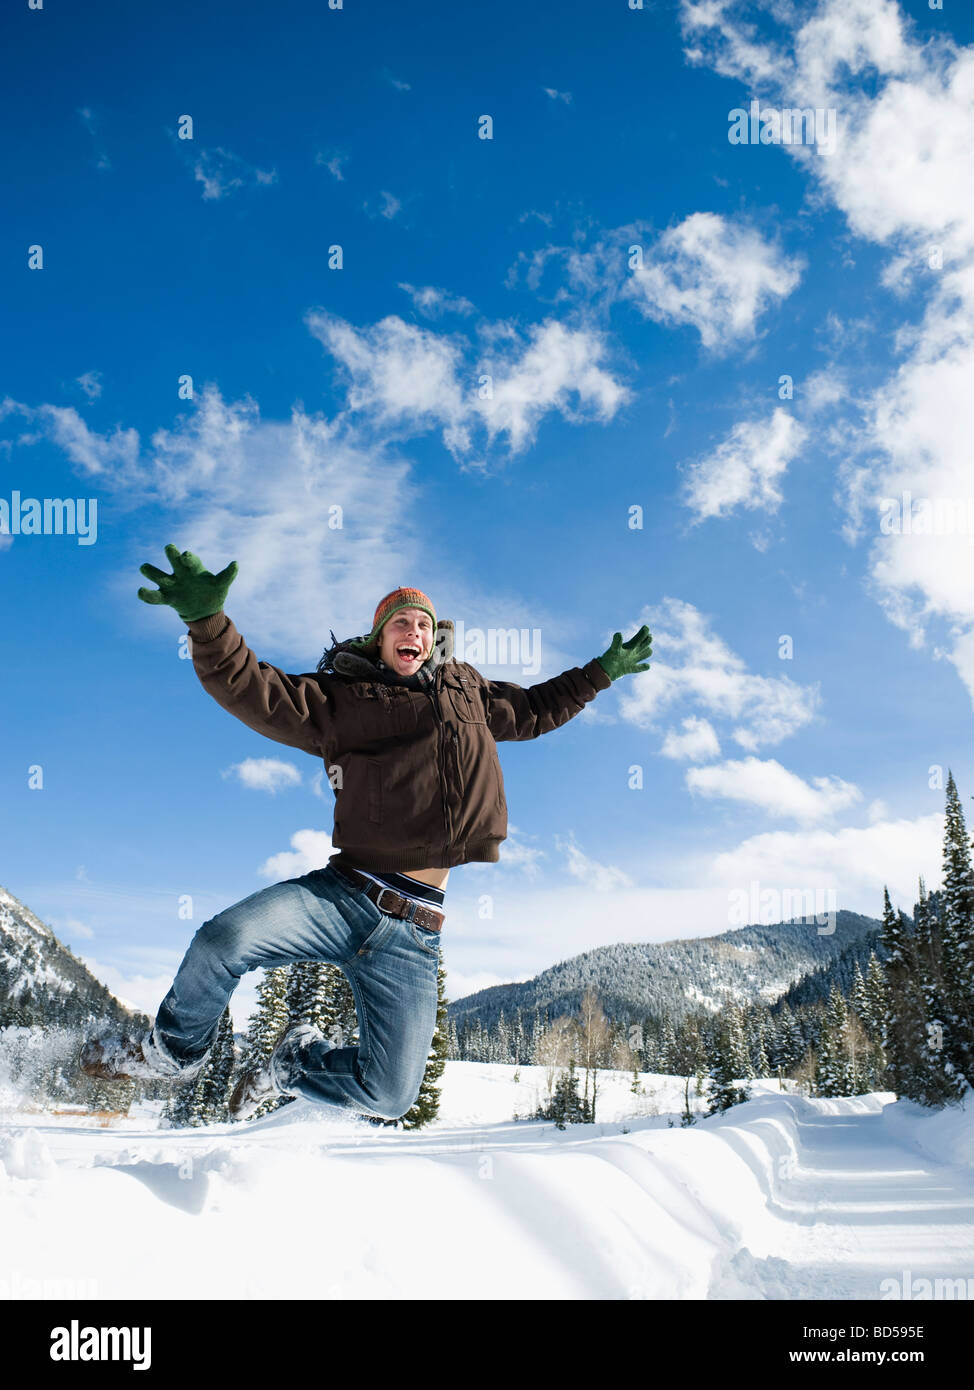 A man outdoors in snowy surroundings jumping Stock Photo